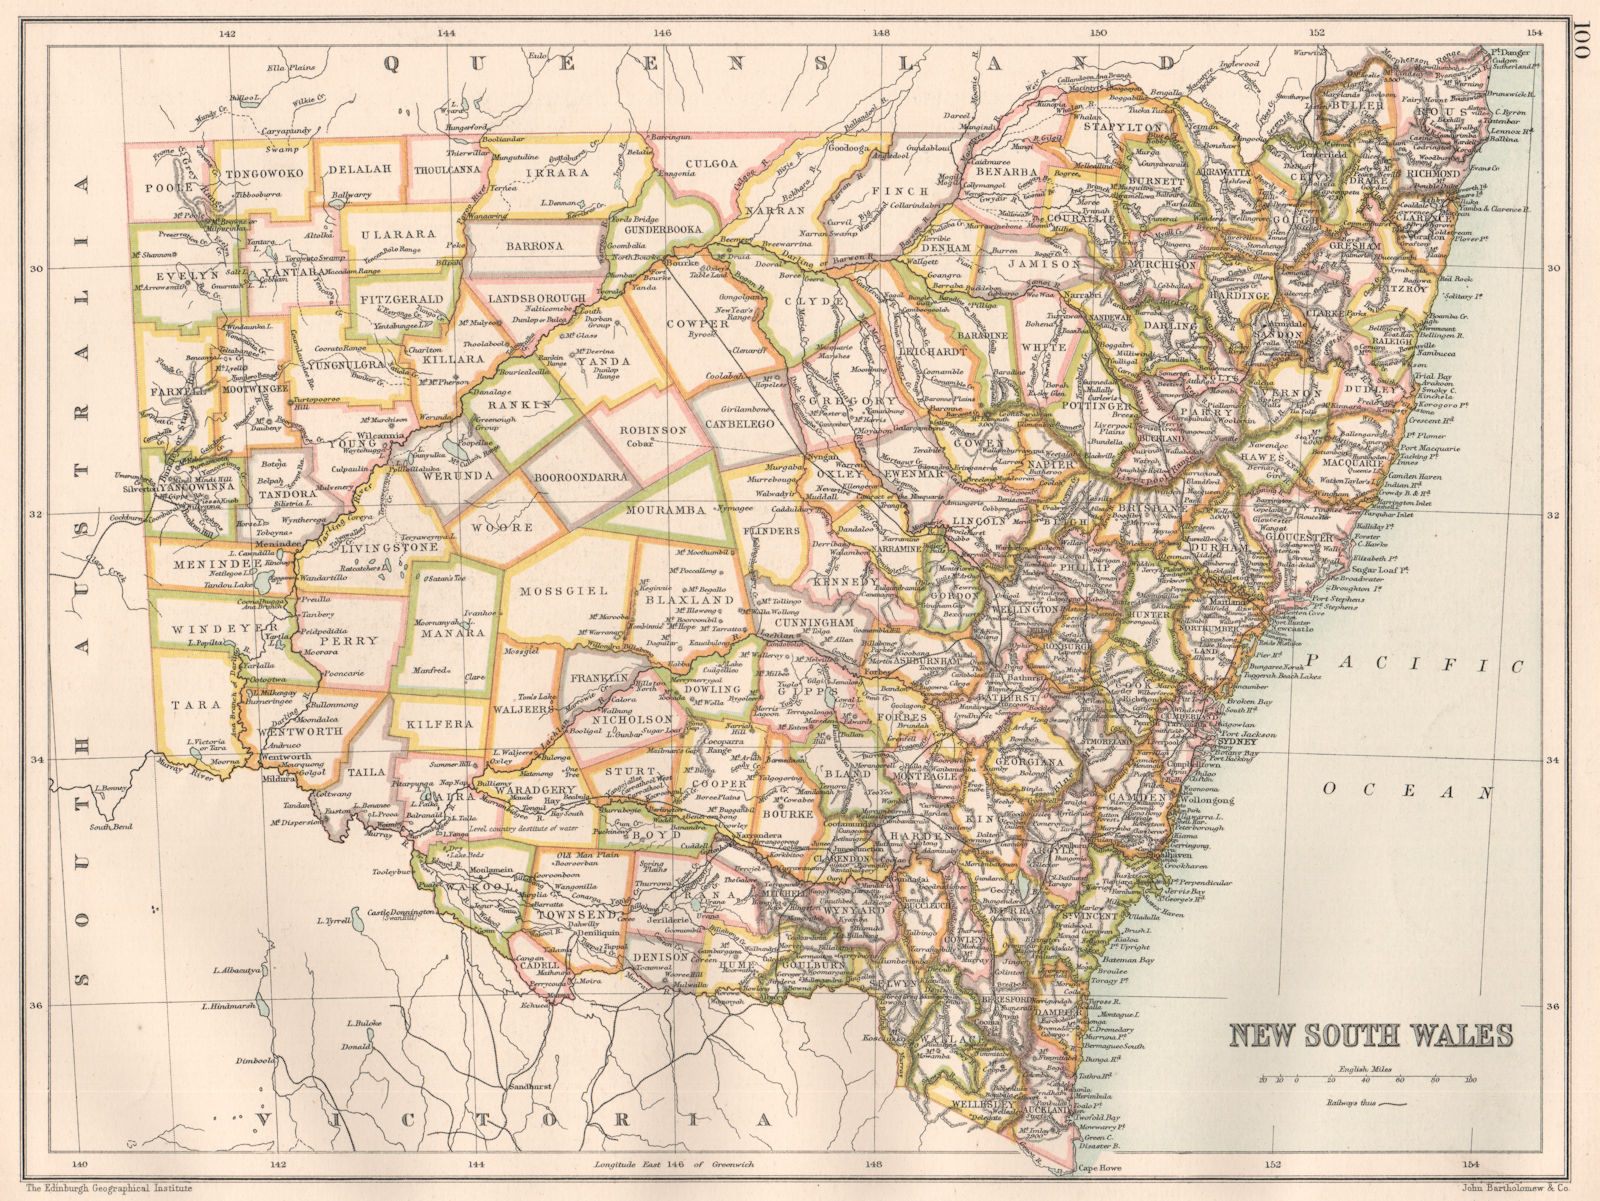 NEW SOUTH WALES. State map showing counties. Australia. BARTHOLOMEW 1891